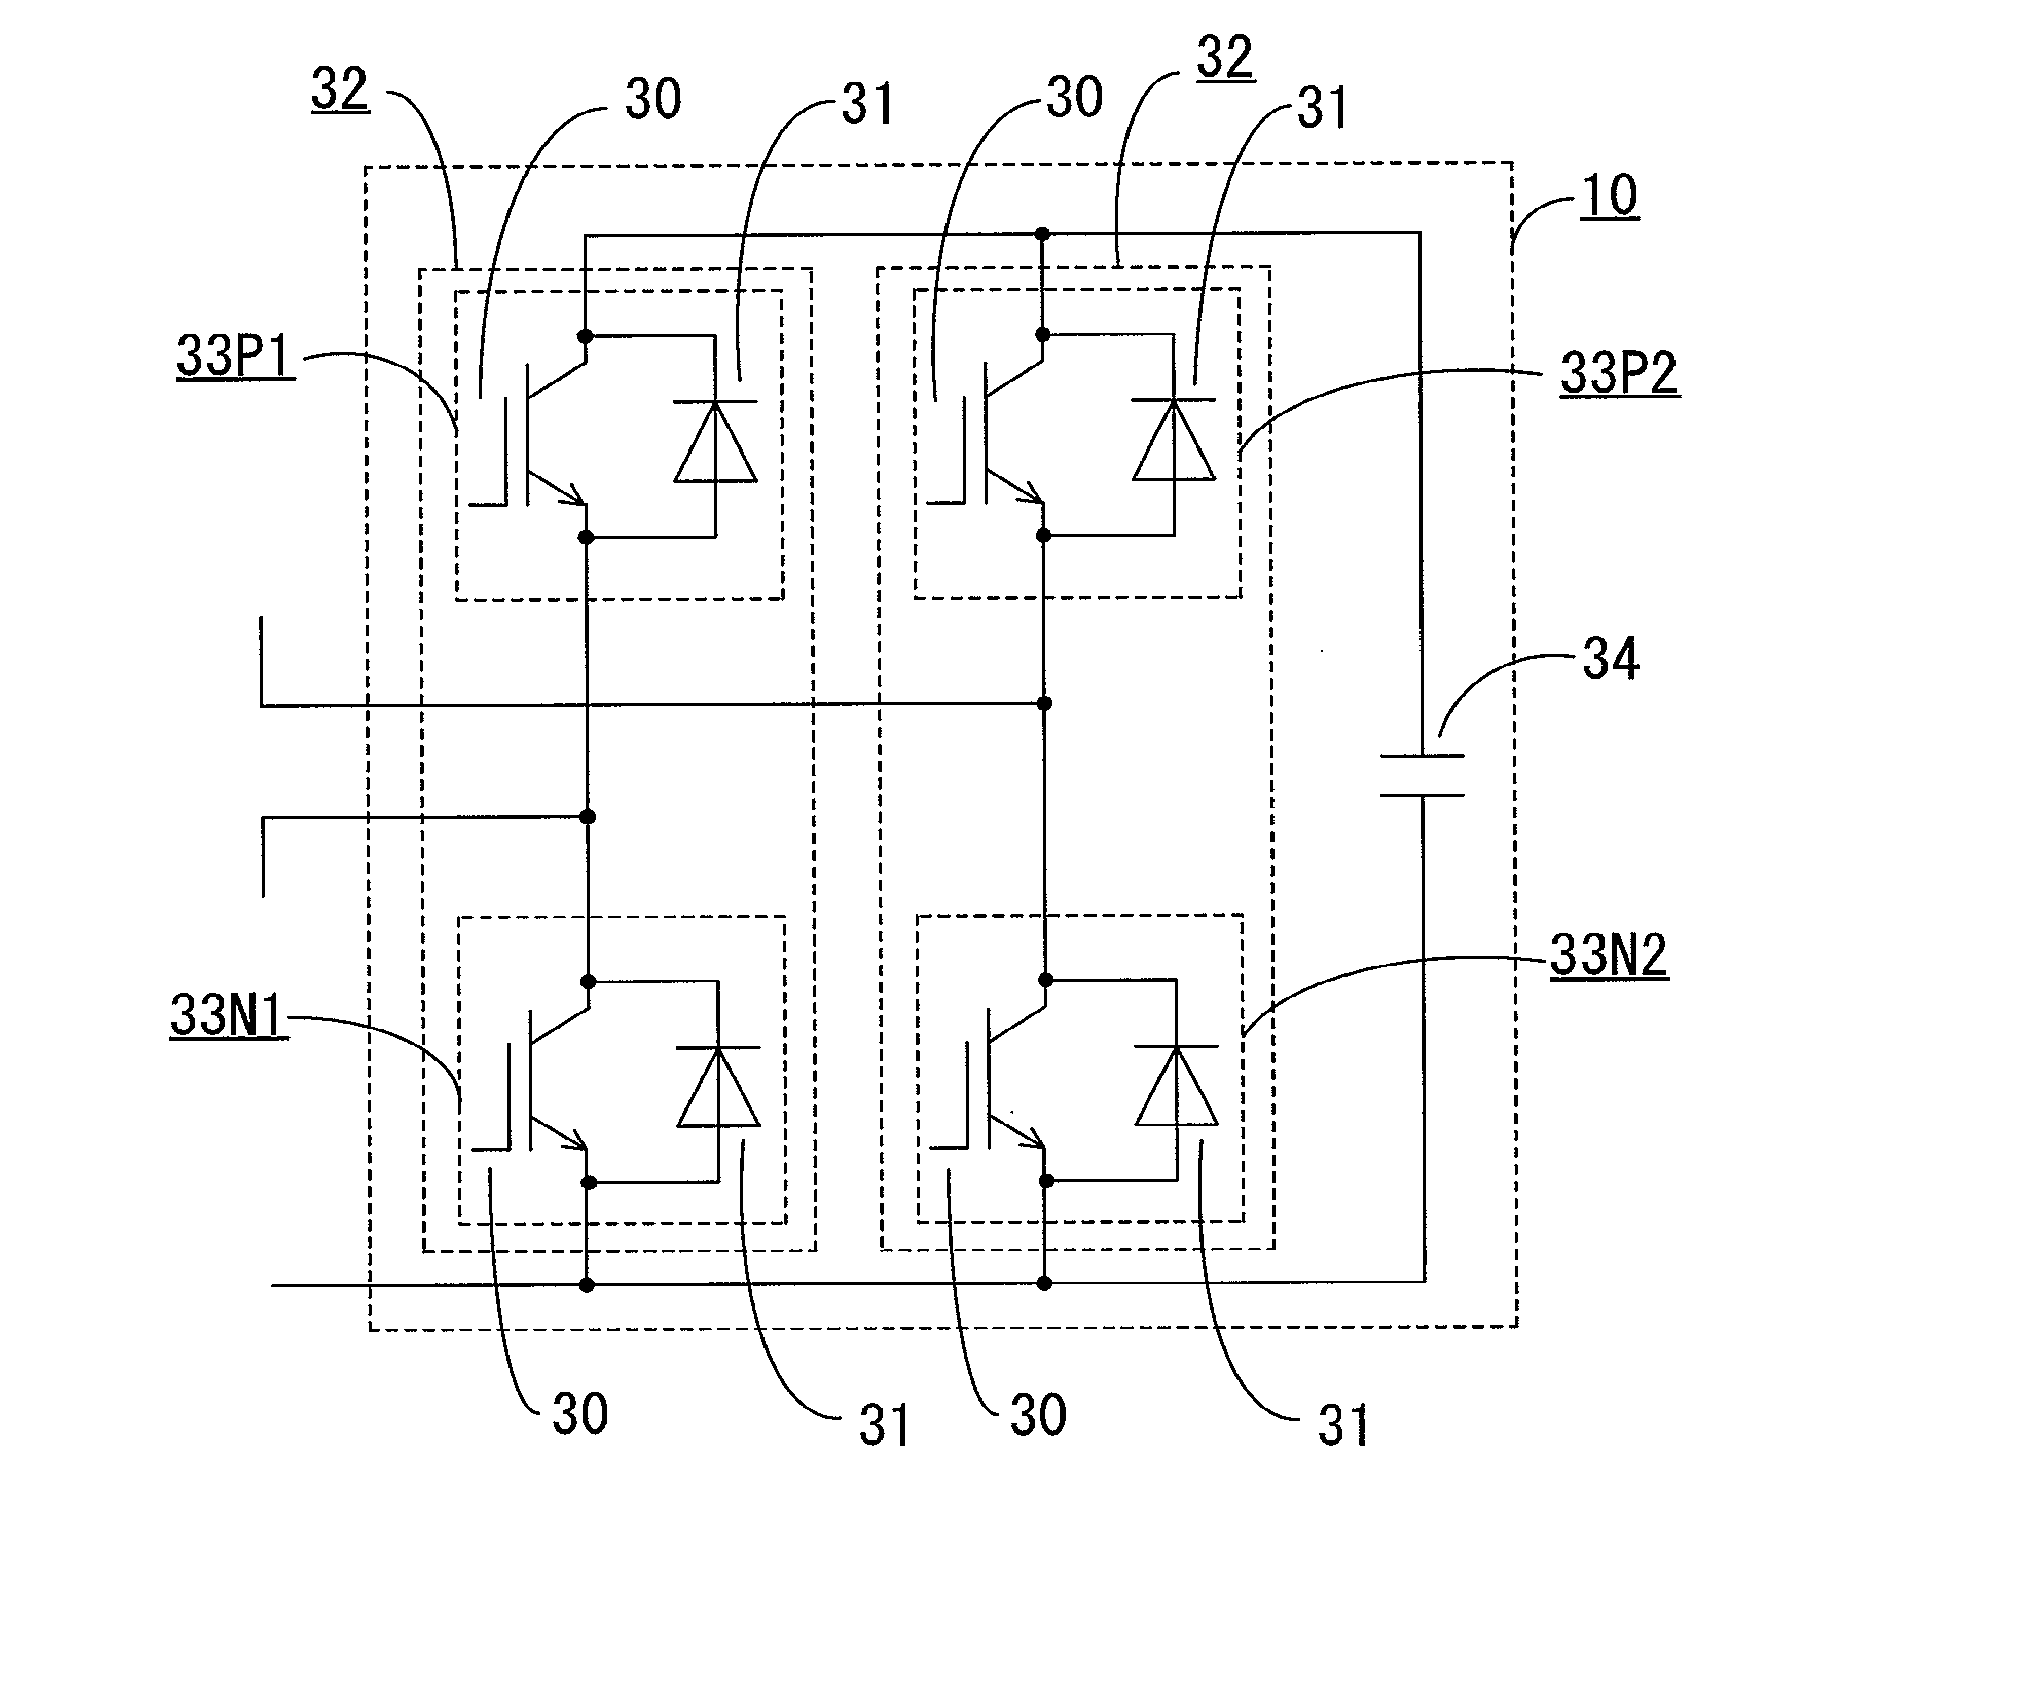 Direct-current power transmission power conversion device and direct-current power transmission power conversion method